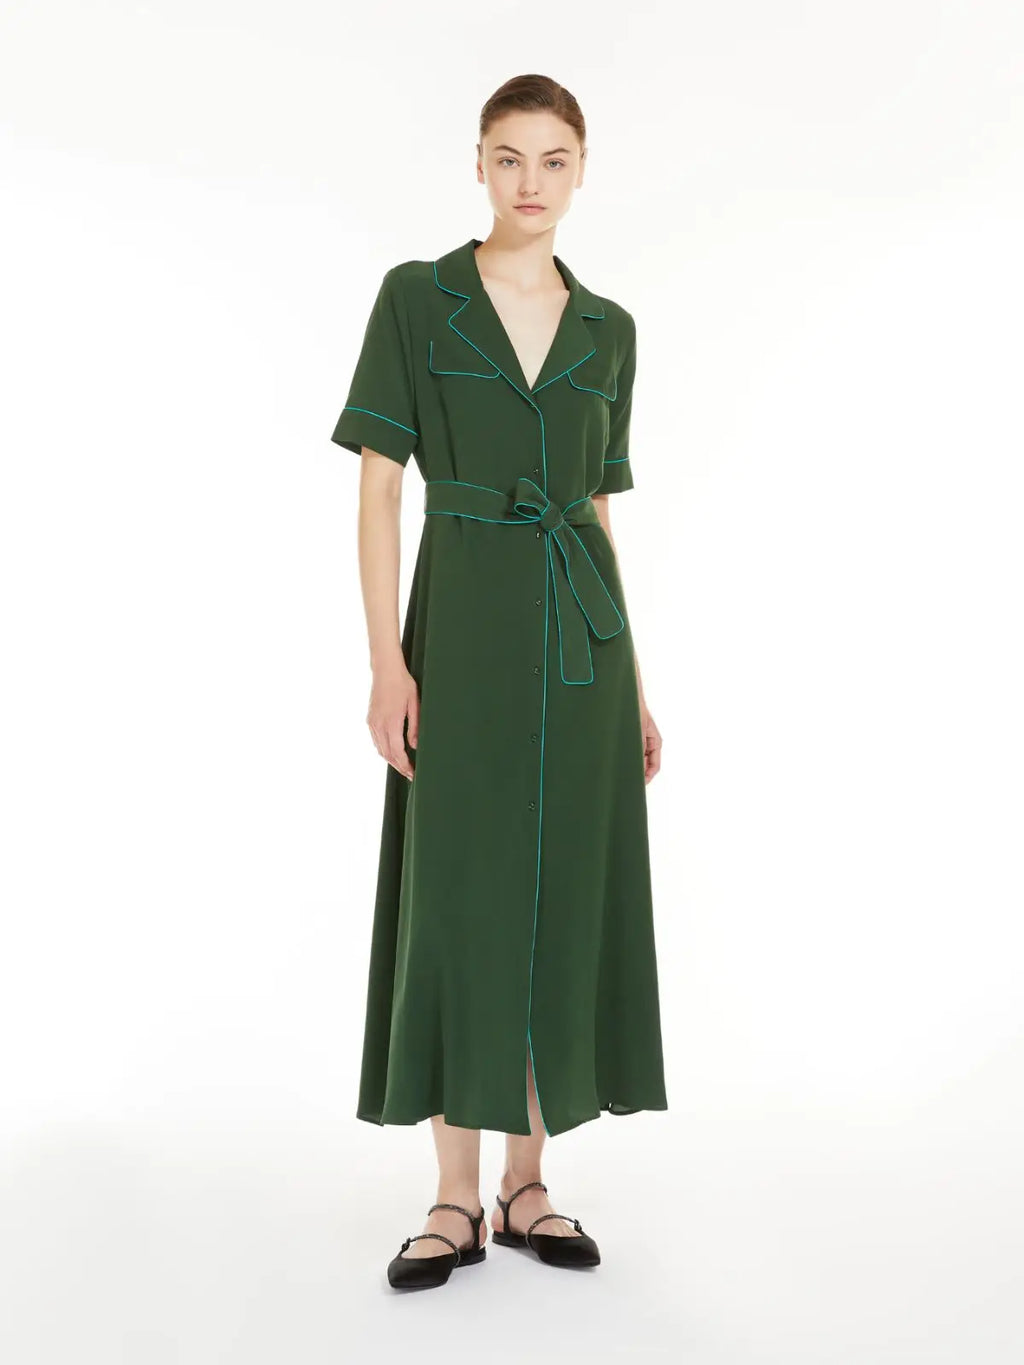 Elevate your style with MAX MARA's Jene Belted Silk Shirtdress. This French-inspired dress exudes a sophisticated and elegant persona with its versatile moss green color. The belted waist accentuates your figure while the medium length adds a touch of refinement. Perfect for formal occasions and embodies a light luxury aesthetic.